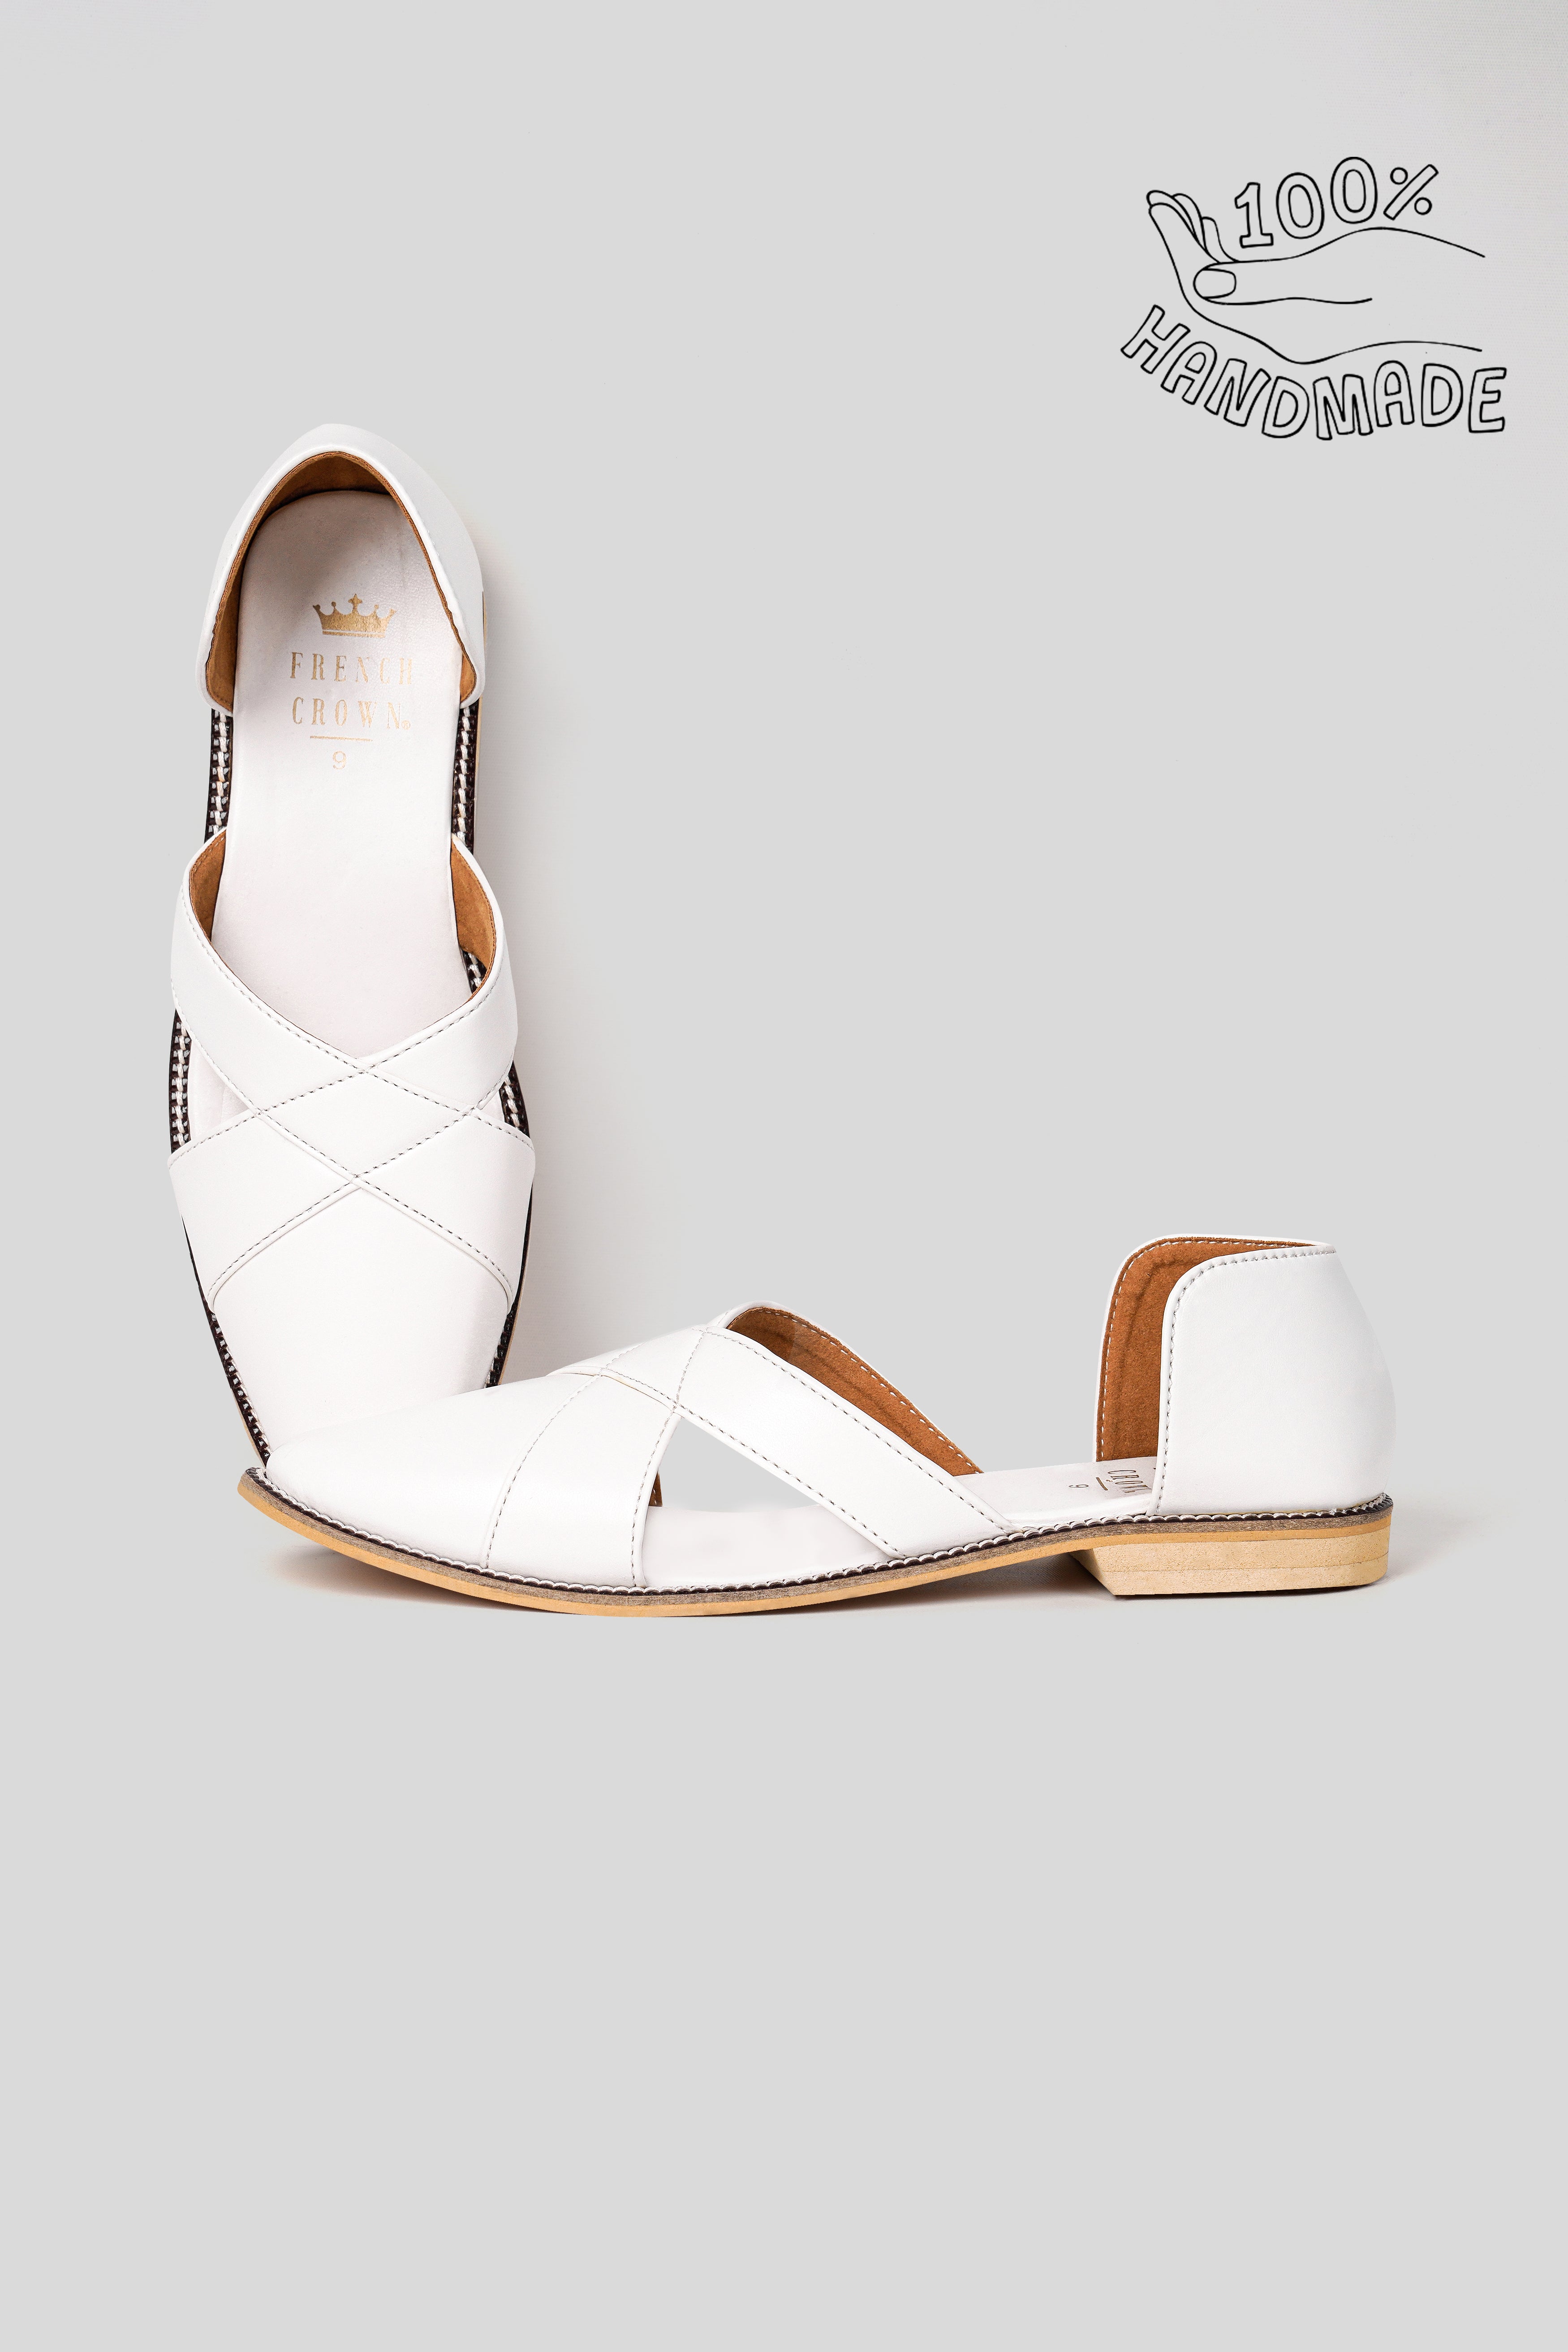 Bright White Classic Criss Cross Vegan Leather Hand Stitched Pathanis Sandal FT134-6, FT134-7, FT134-8, FT134-9, FT134-10, FT134-11